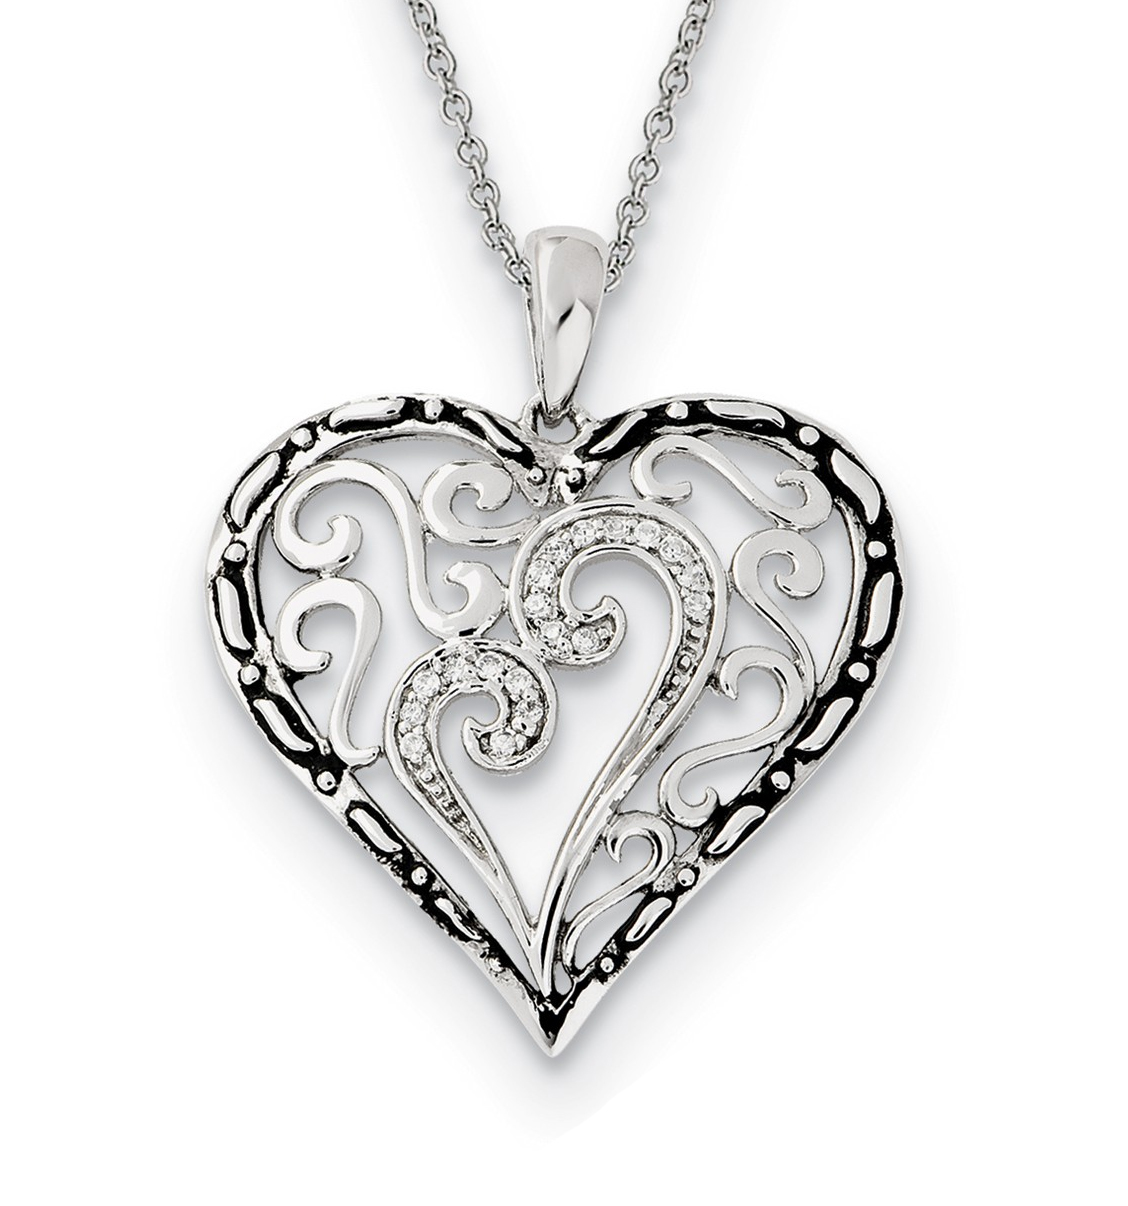   'A Mother's Touch' Antiqued Heart CZ Pendant Necklace, Rhodium-Plated Sterling Silver, 18